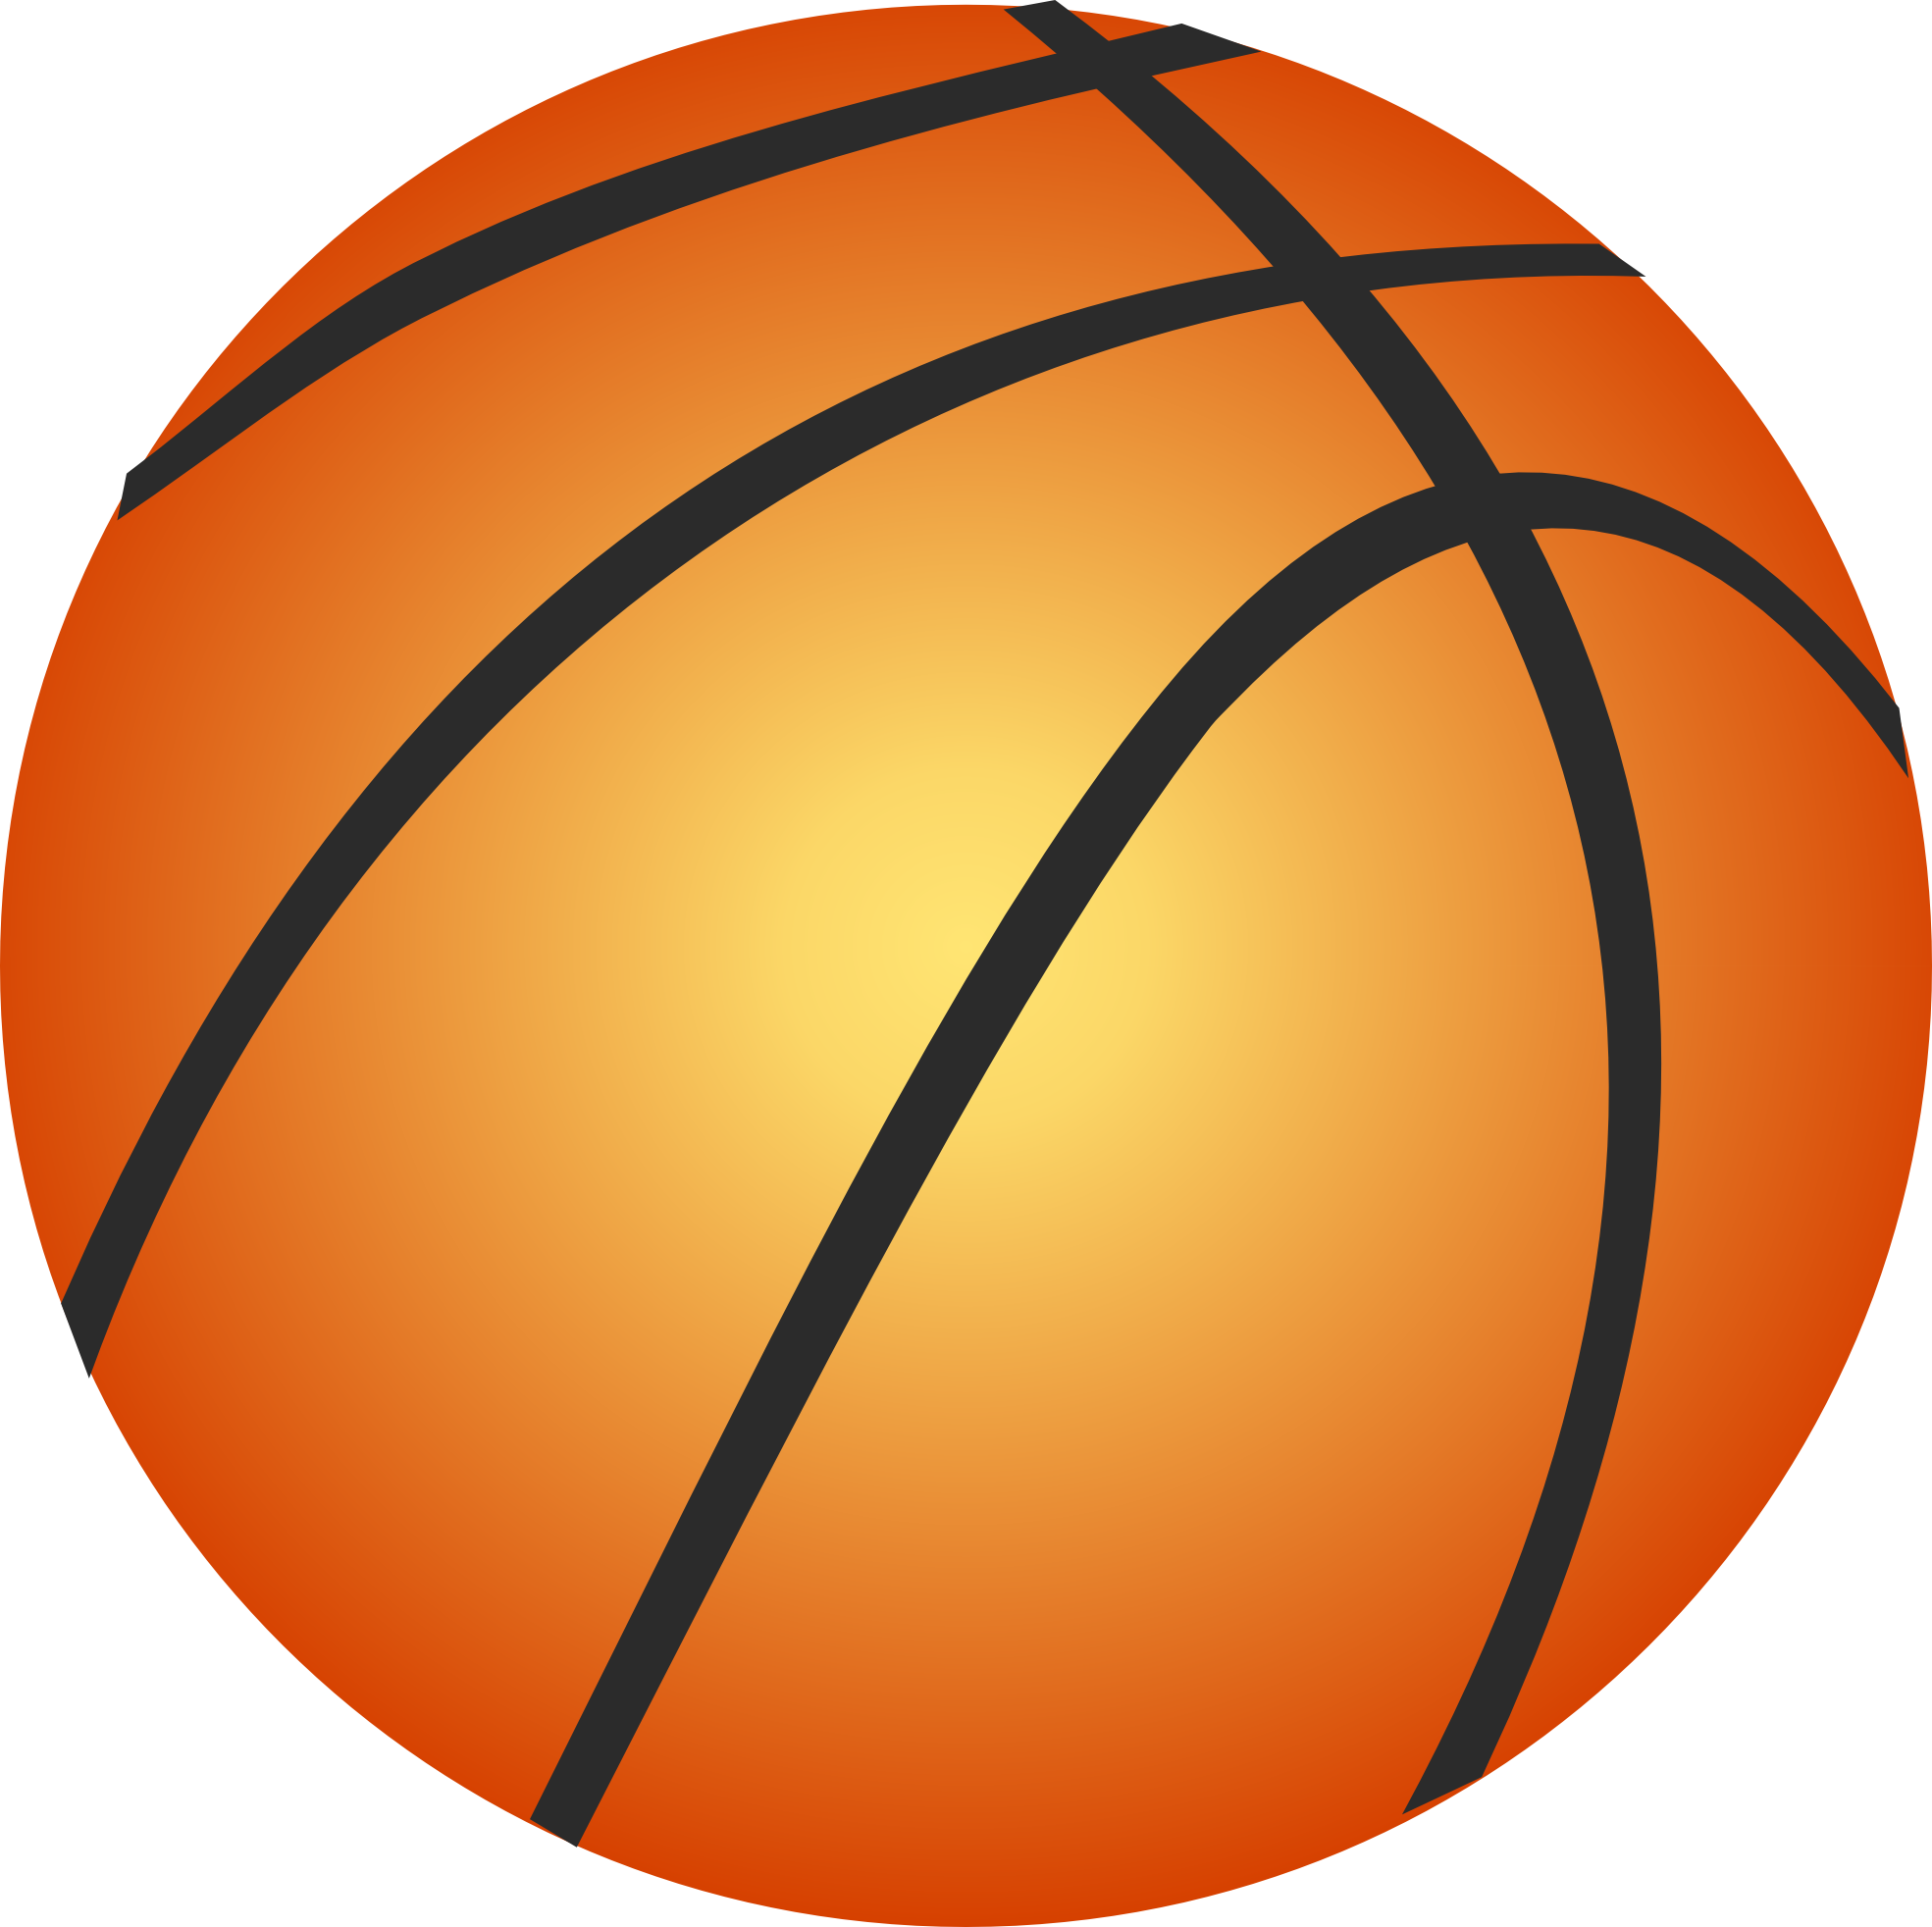 Basketball with Fun Text